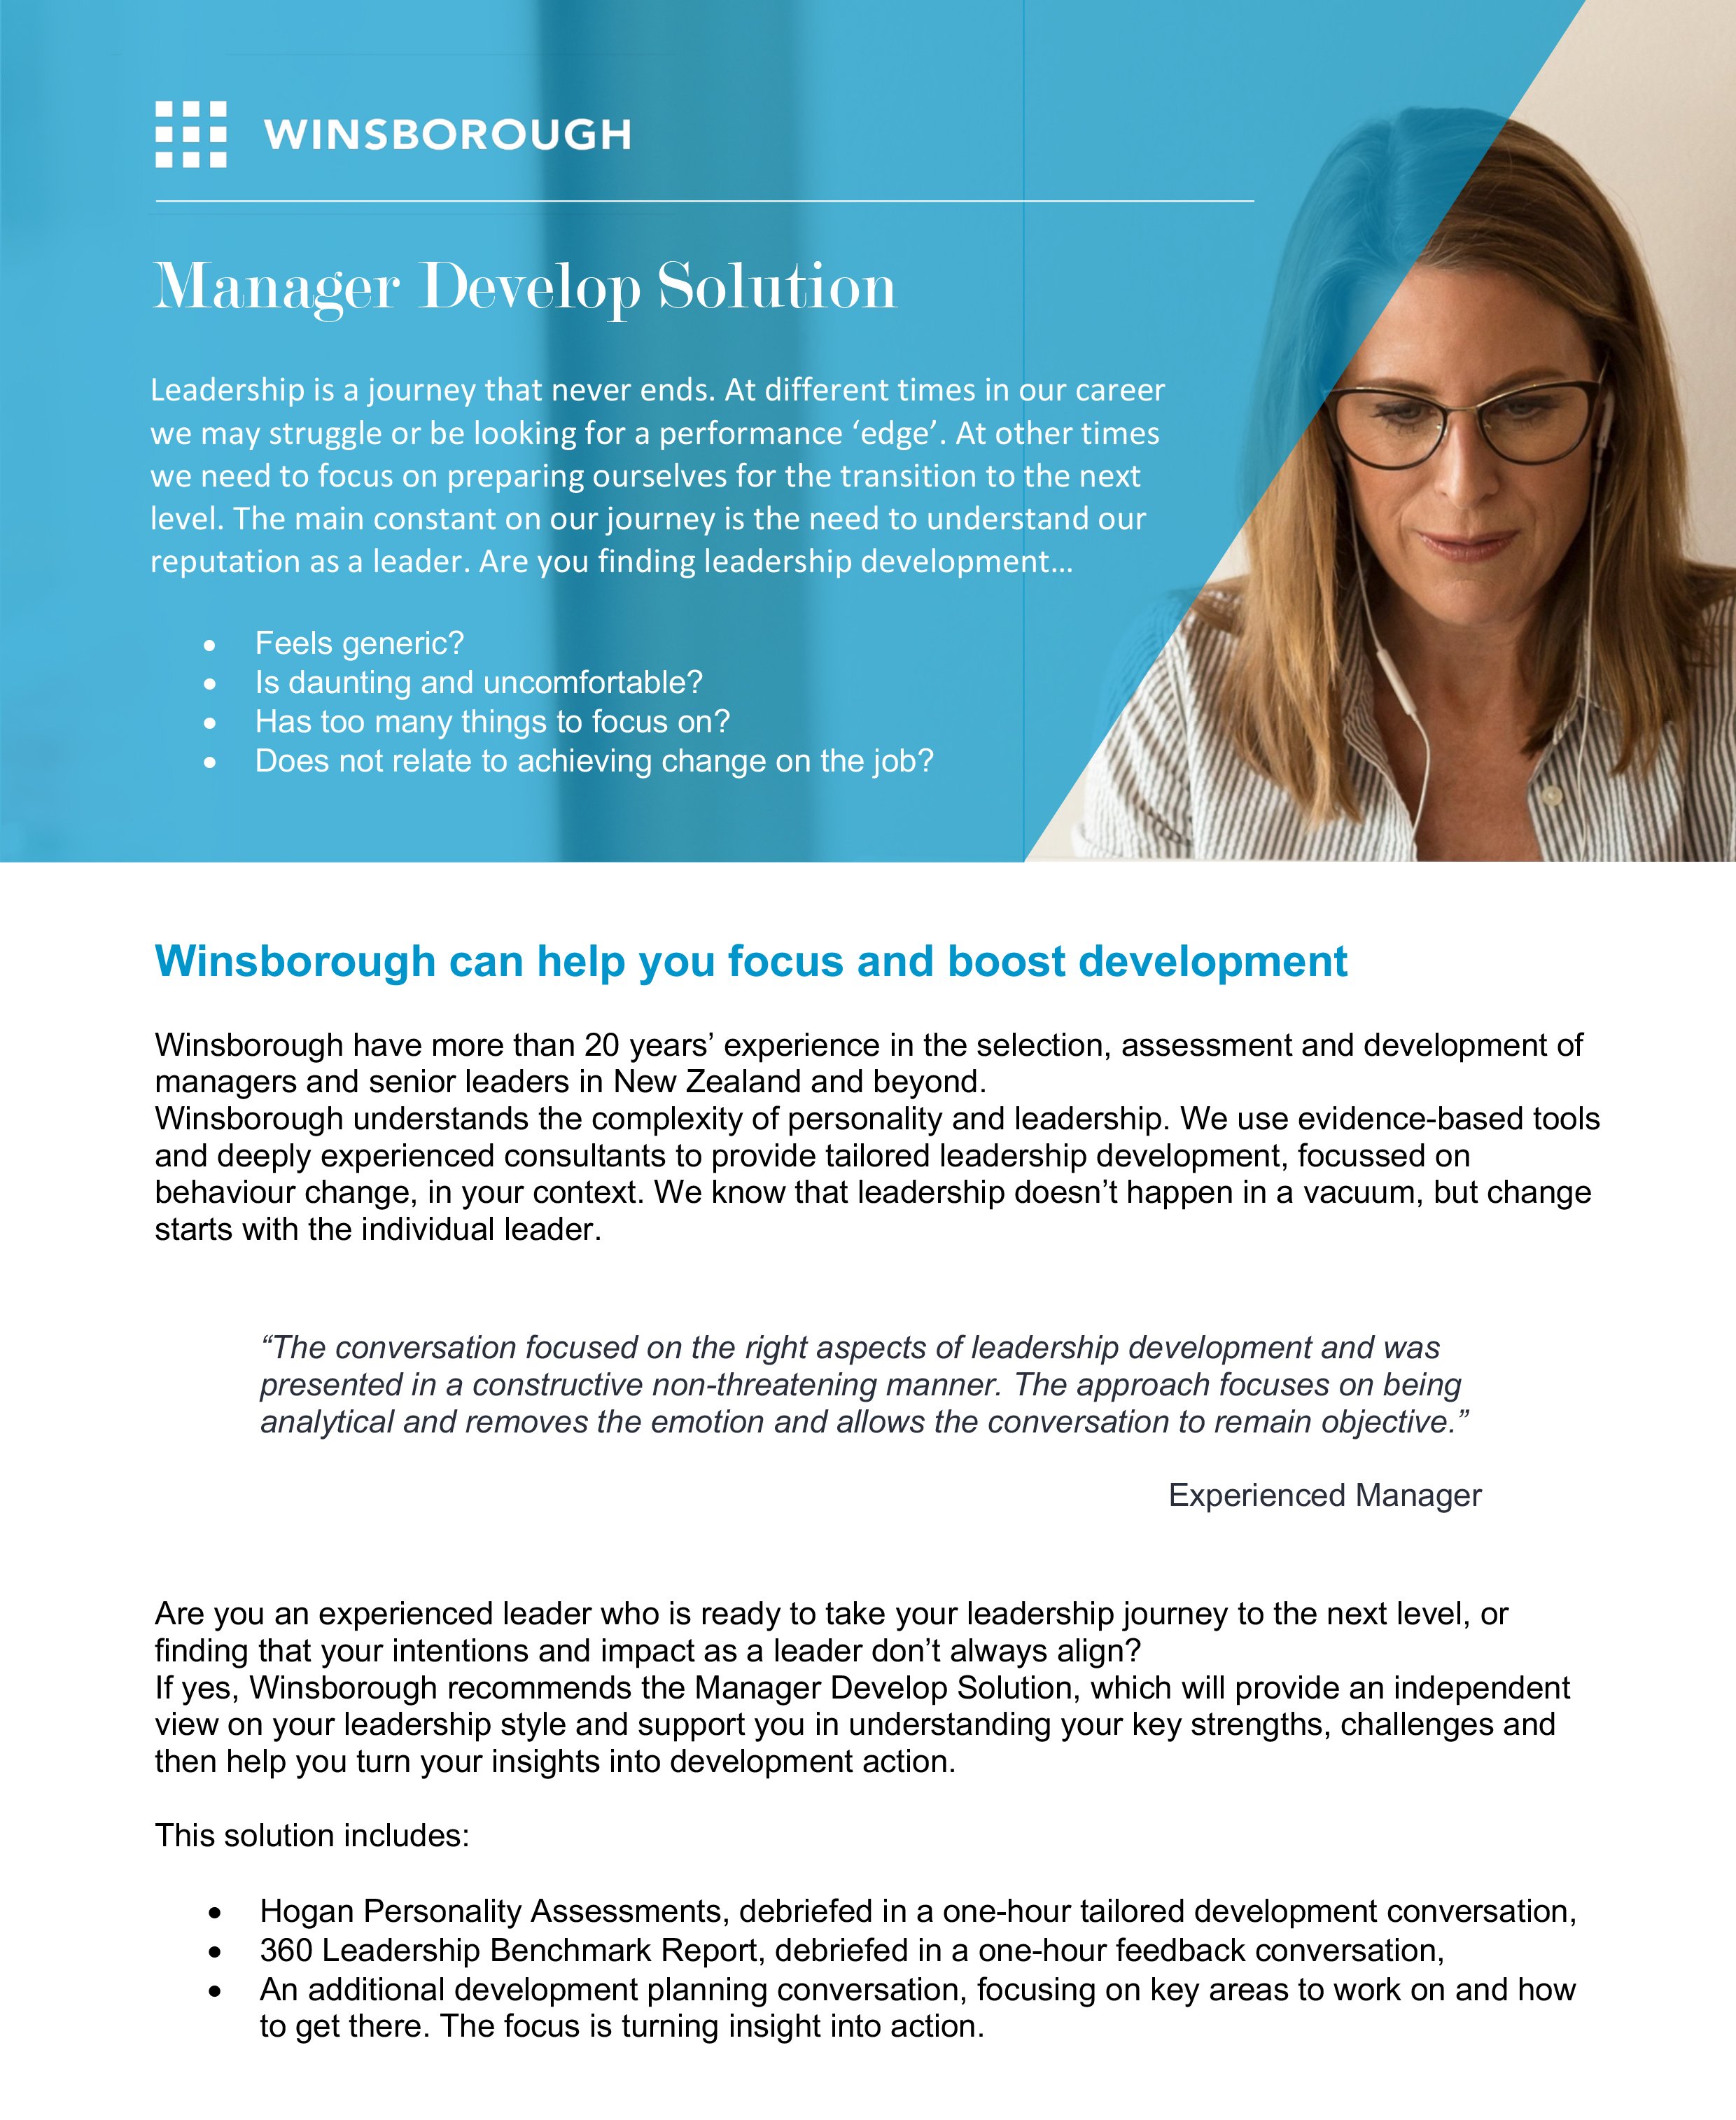 99_Winsborough_NP_OnePageOverview_Manager_Develop_2019_12_04 copy